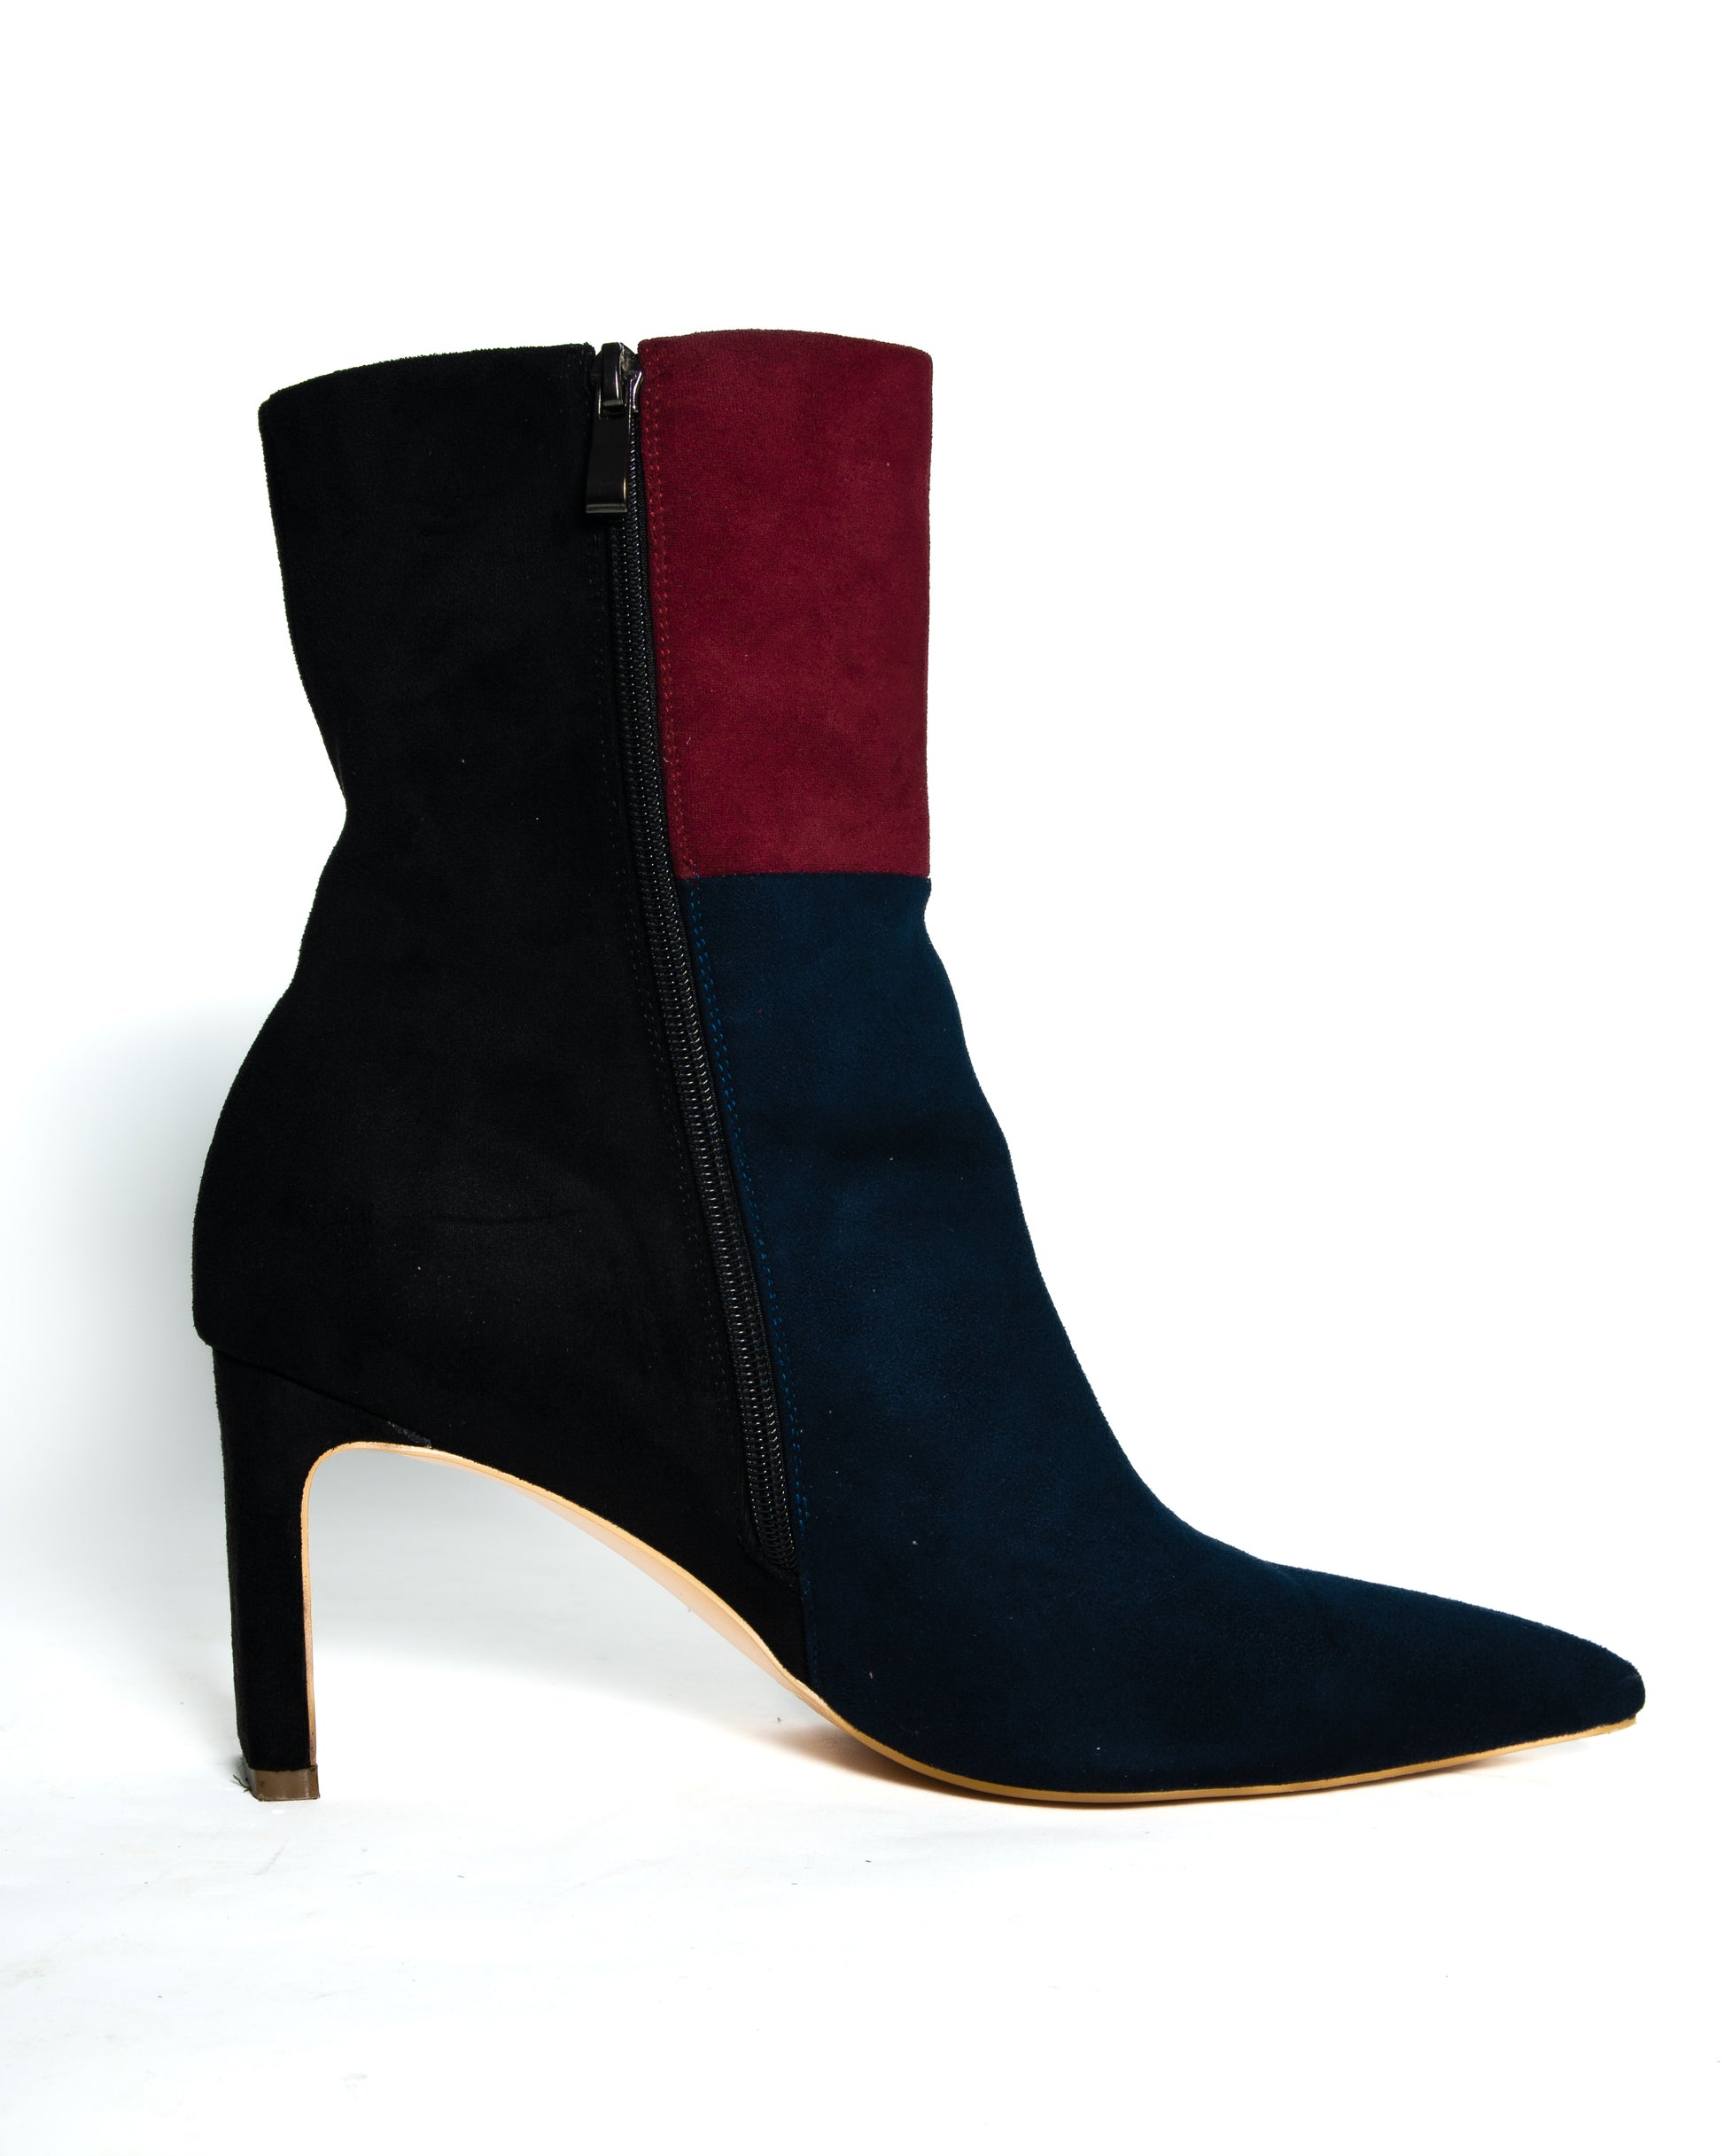 Warming suede material and comfortable cut bootie for fall and winter